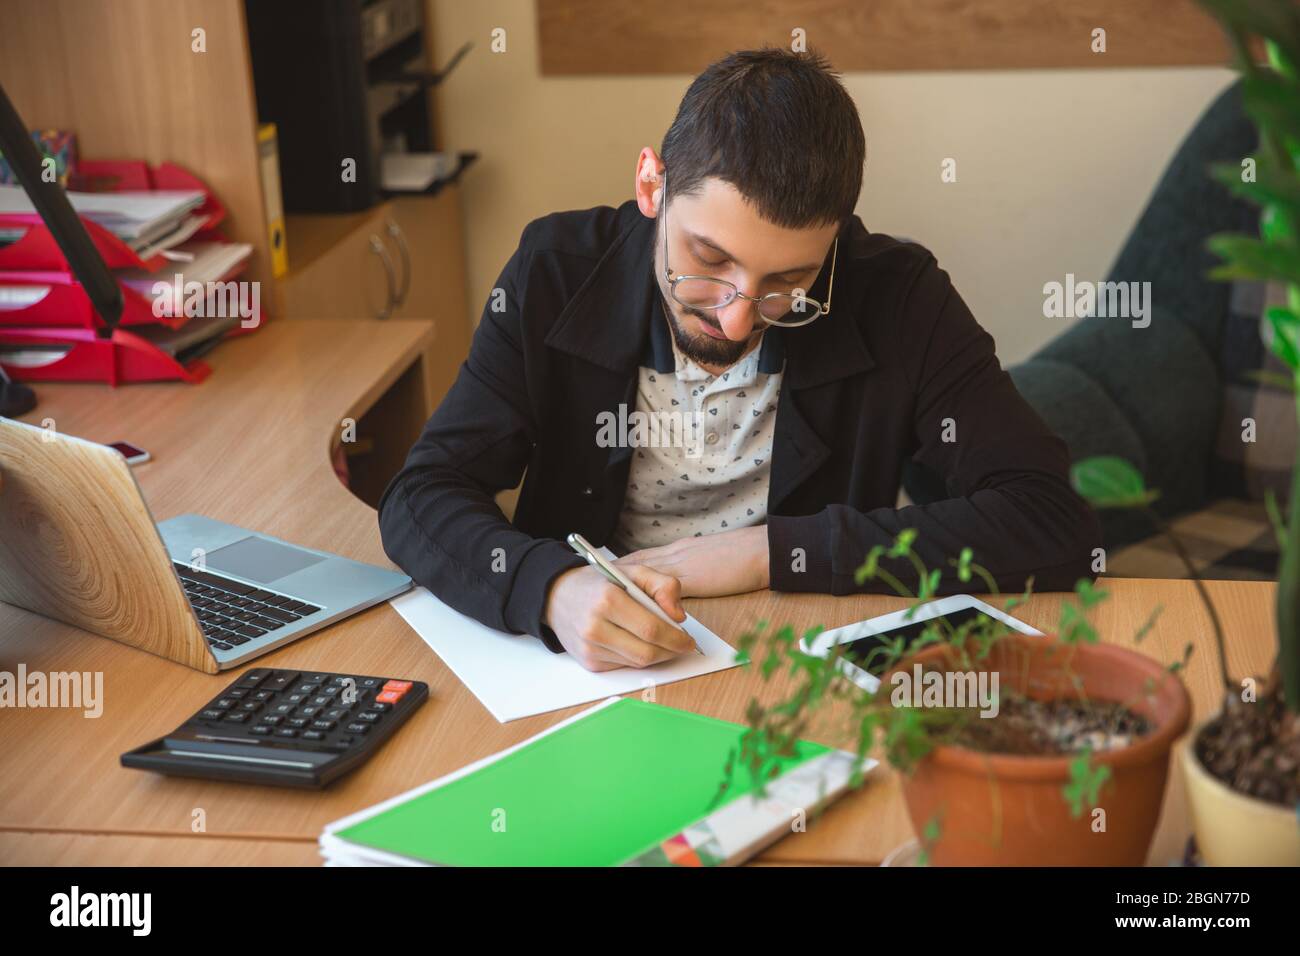 Paperwork. Caucasian entrepreneur, businessman, manager working concentrated in office. Looks serios and busy, wearing classic attire. Concept of work, finance, business, success, leadership. Stock Photo